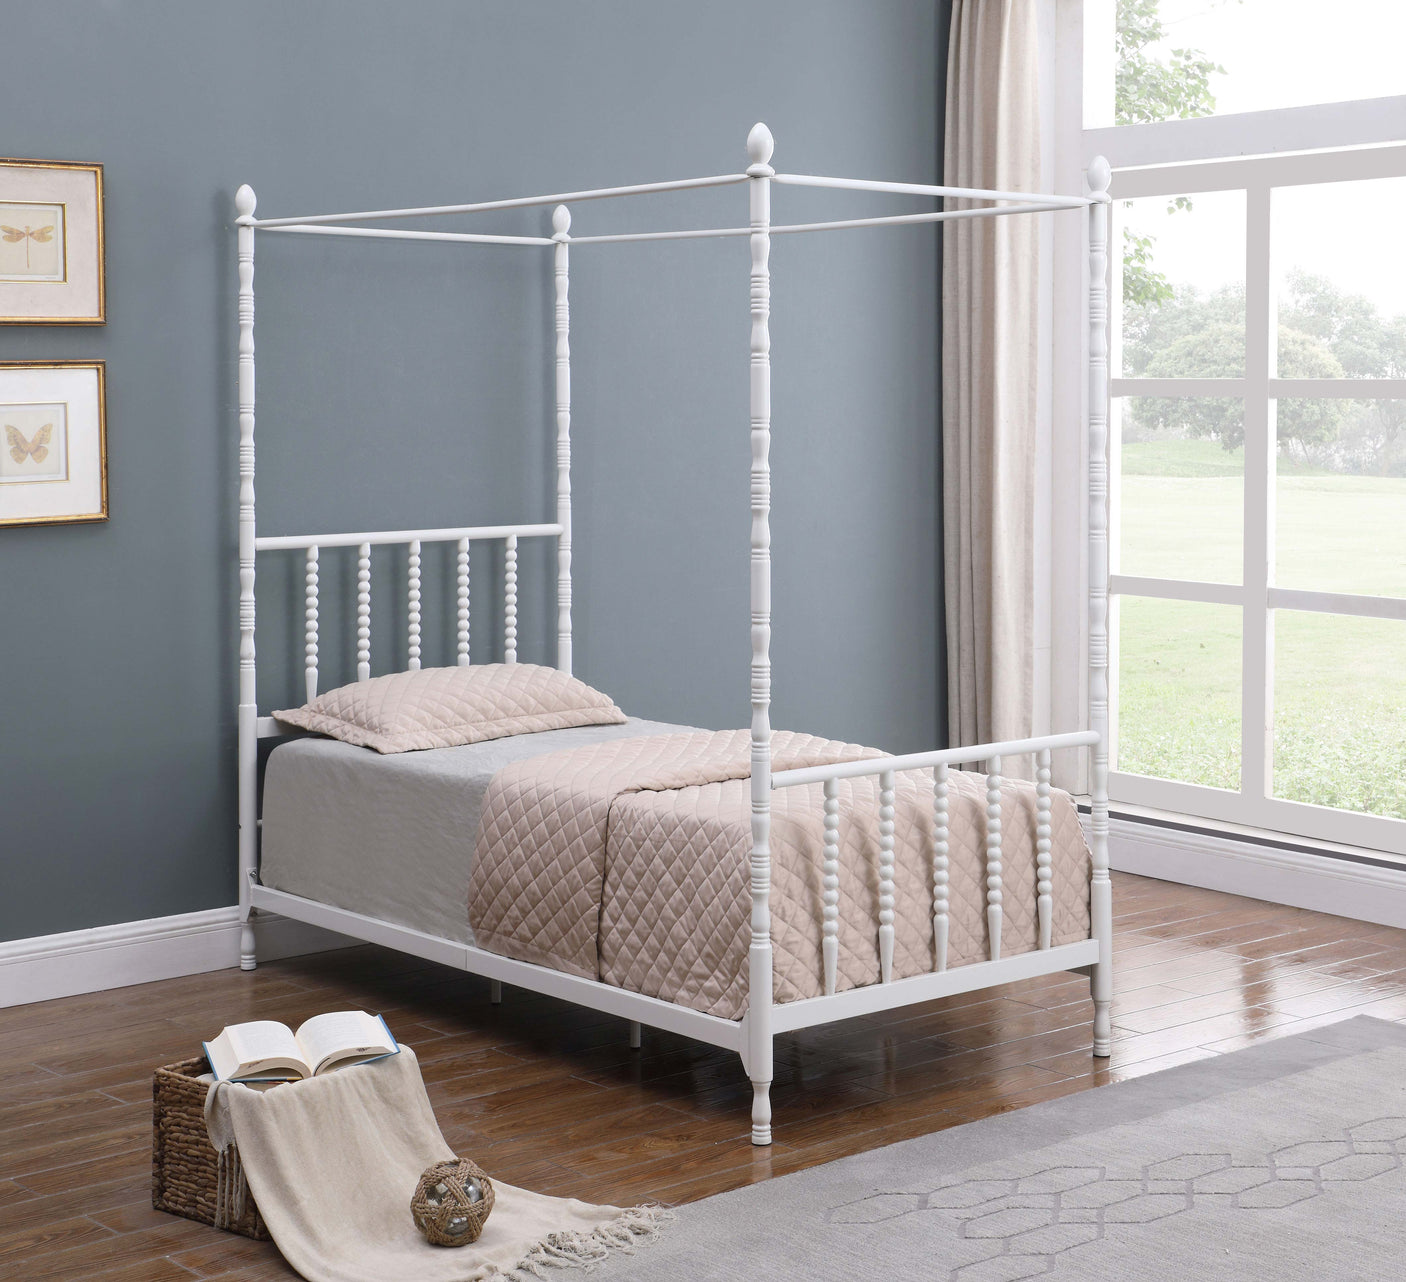 Twin Canopy Bed - Betony Twin Canopy Bed White